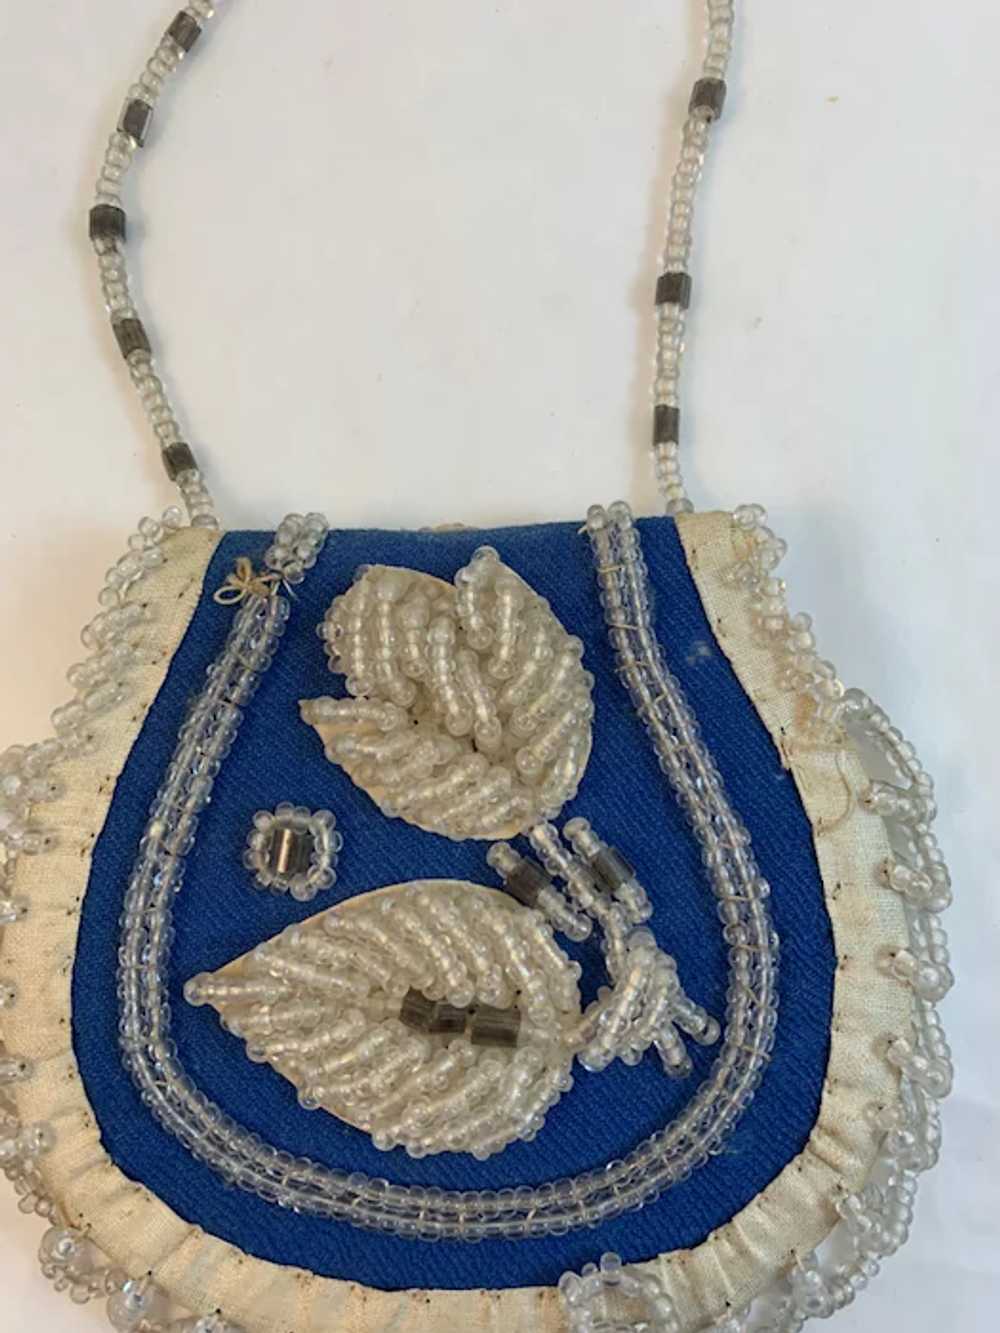 Beaded Cloth Purse Blue and White with Clear Beads - image 8